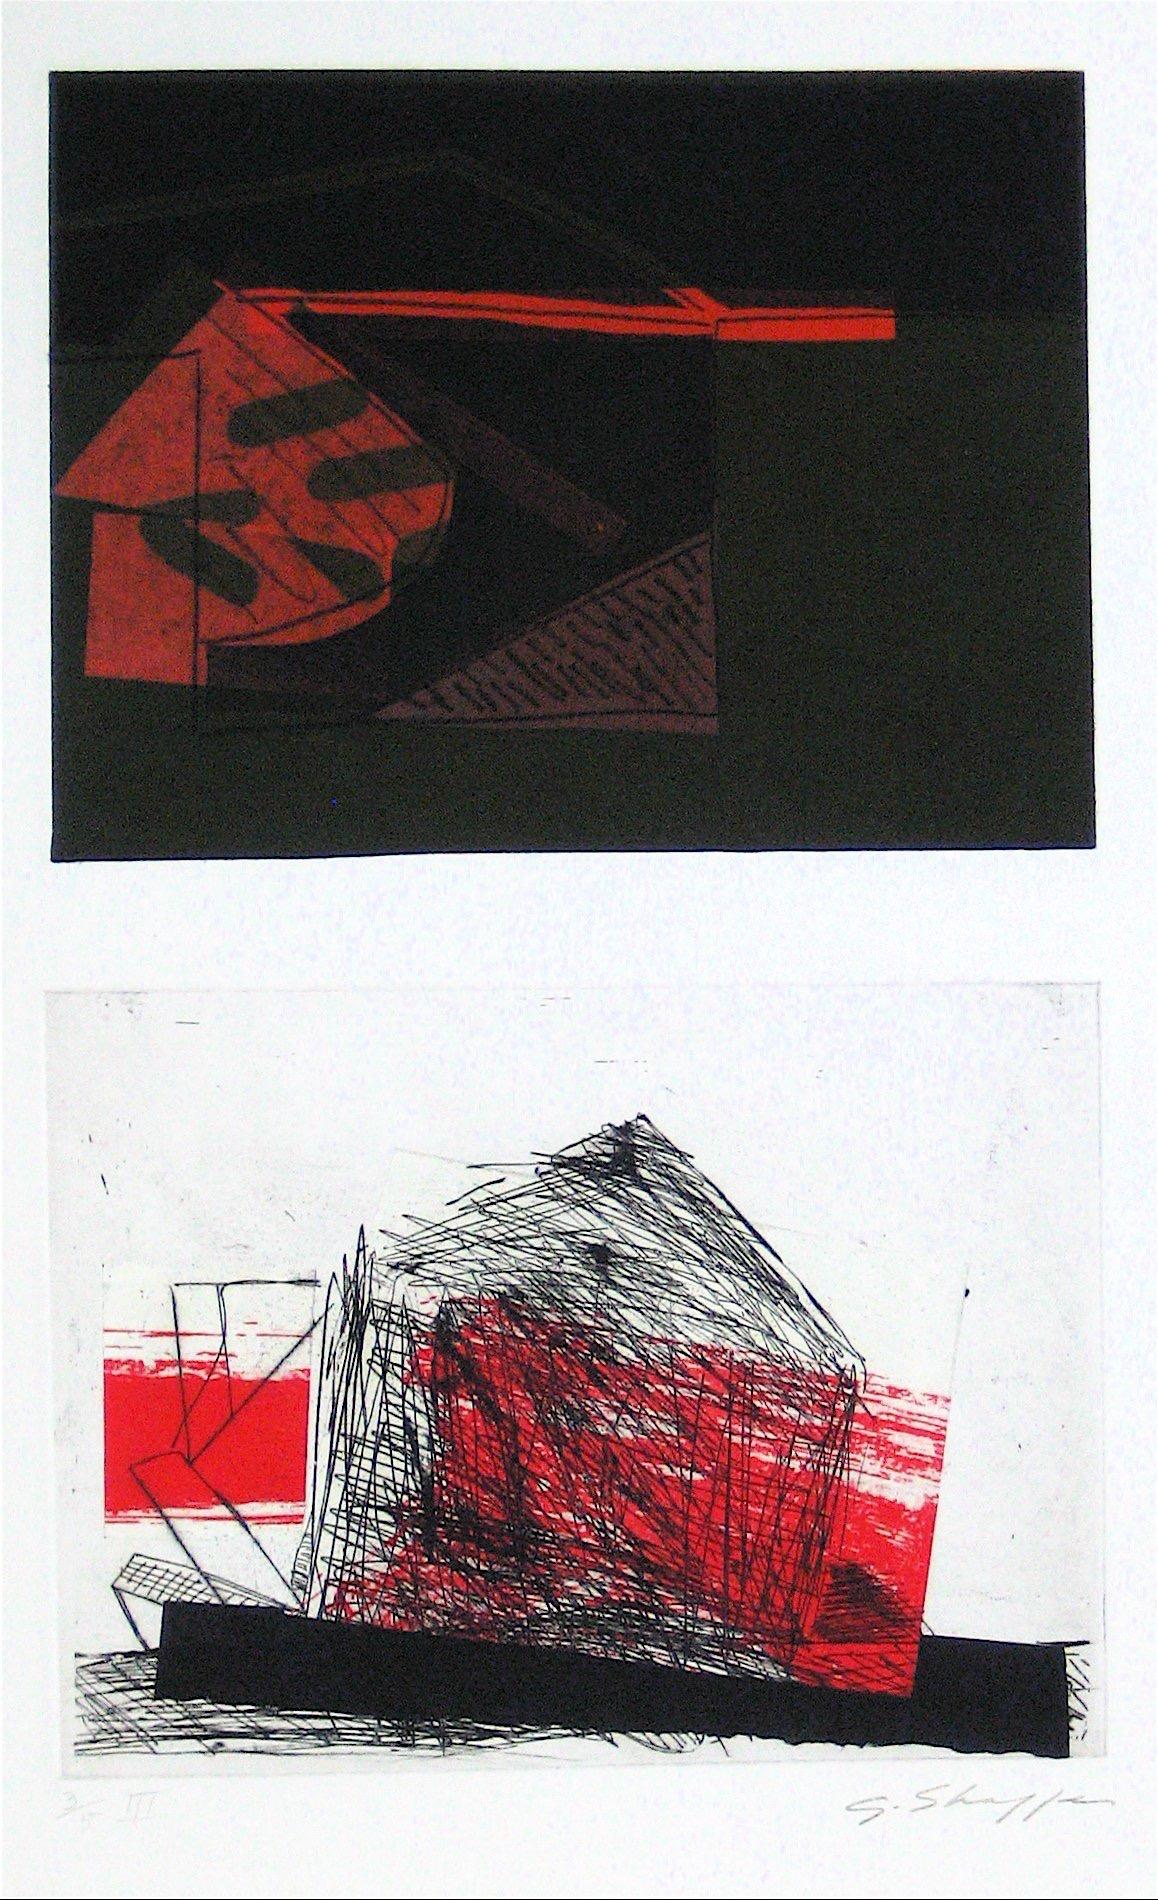 Gary Lee Shaffer Abstract Print - Abstracted Duel Image 1989 Red and Black Litho & Chine Colle